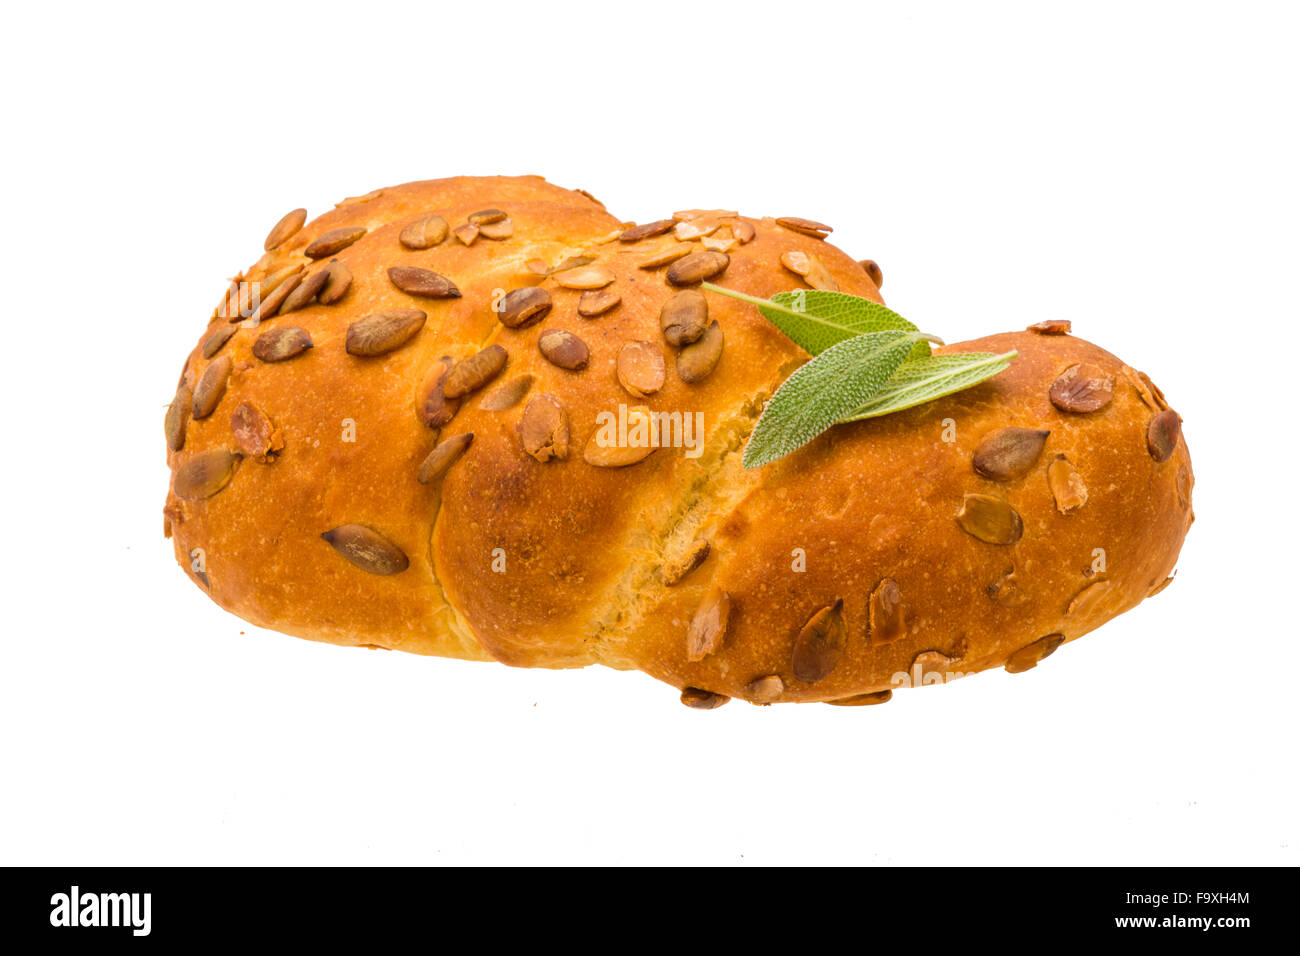 Bread with pumpkin seeds and shalfey leaf Stock Photo